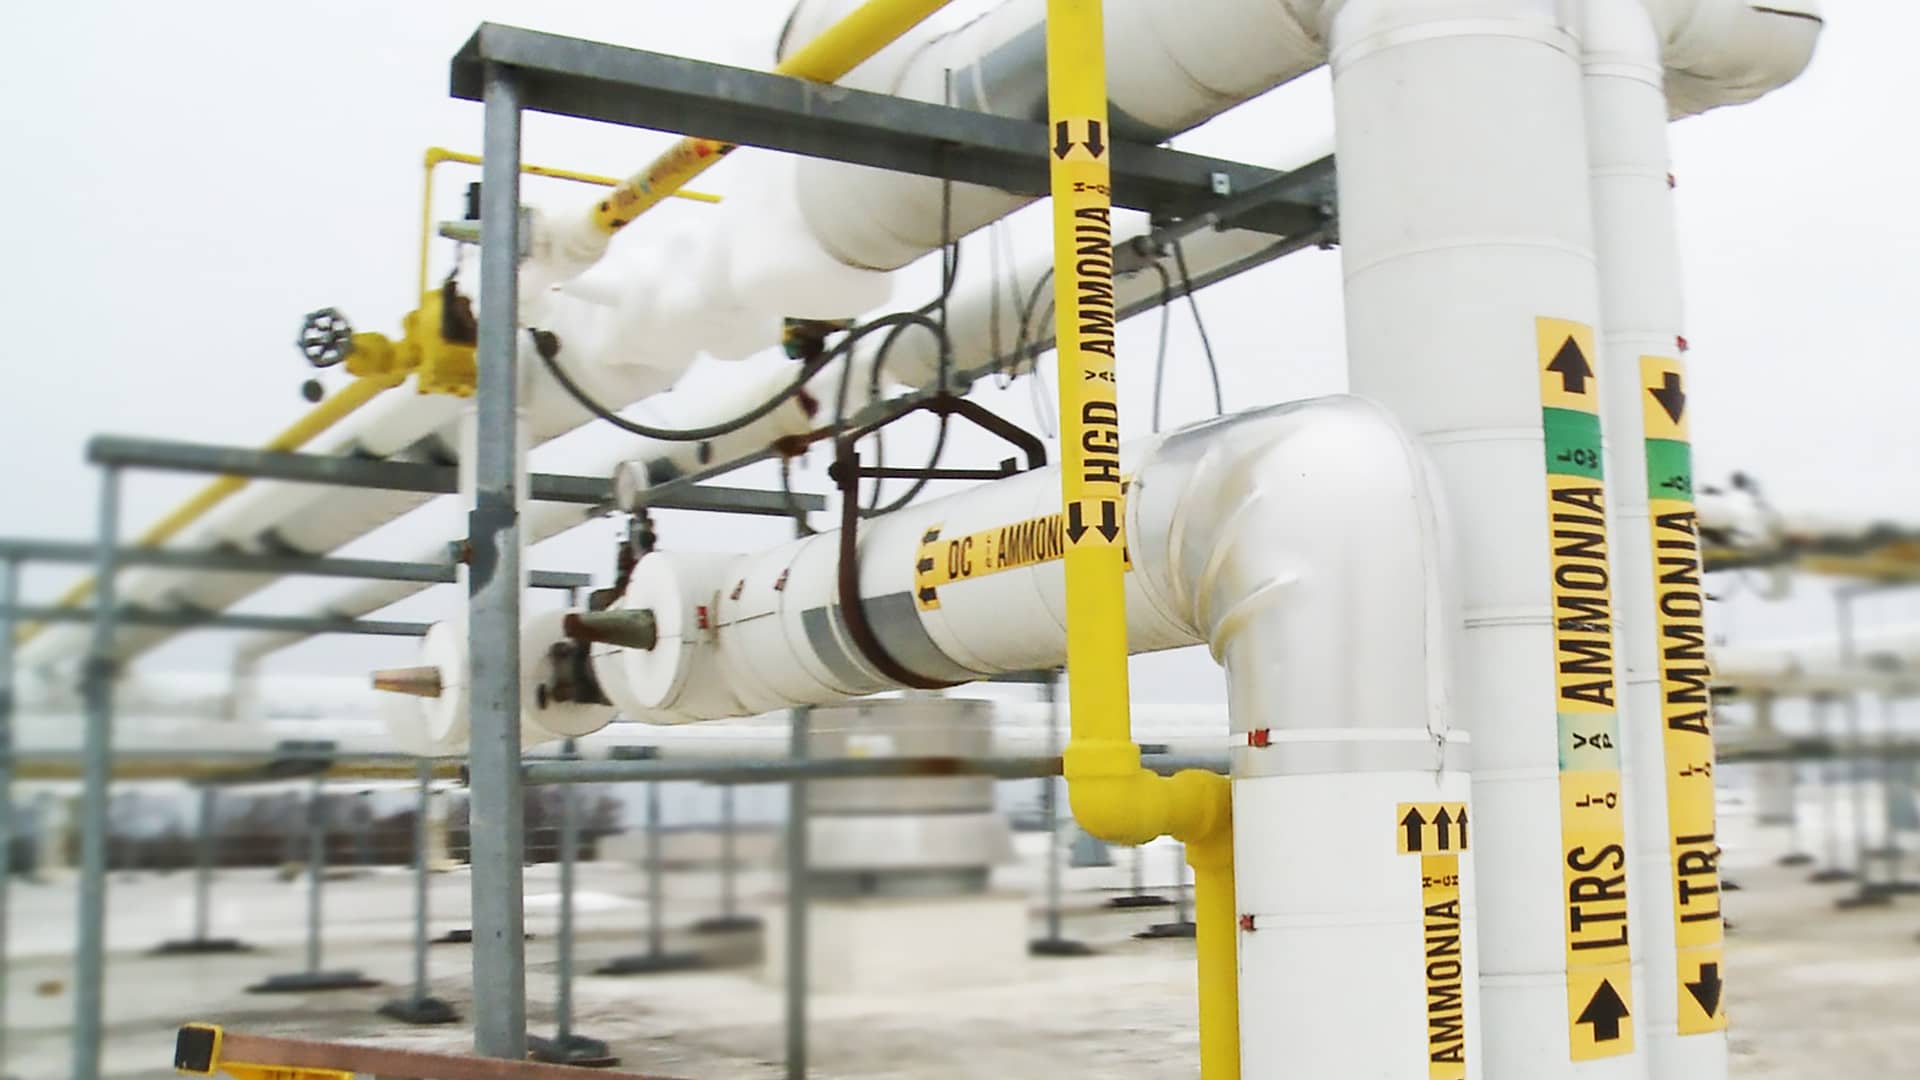 The NDT Option Best Suited for Ammonia Refrigeration Piping Systems